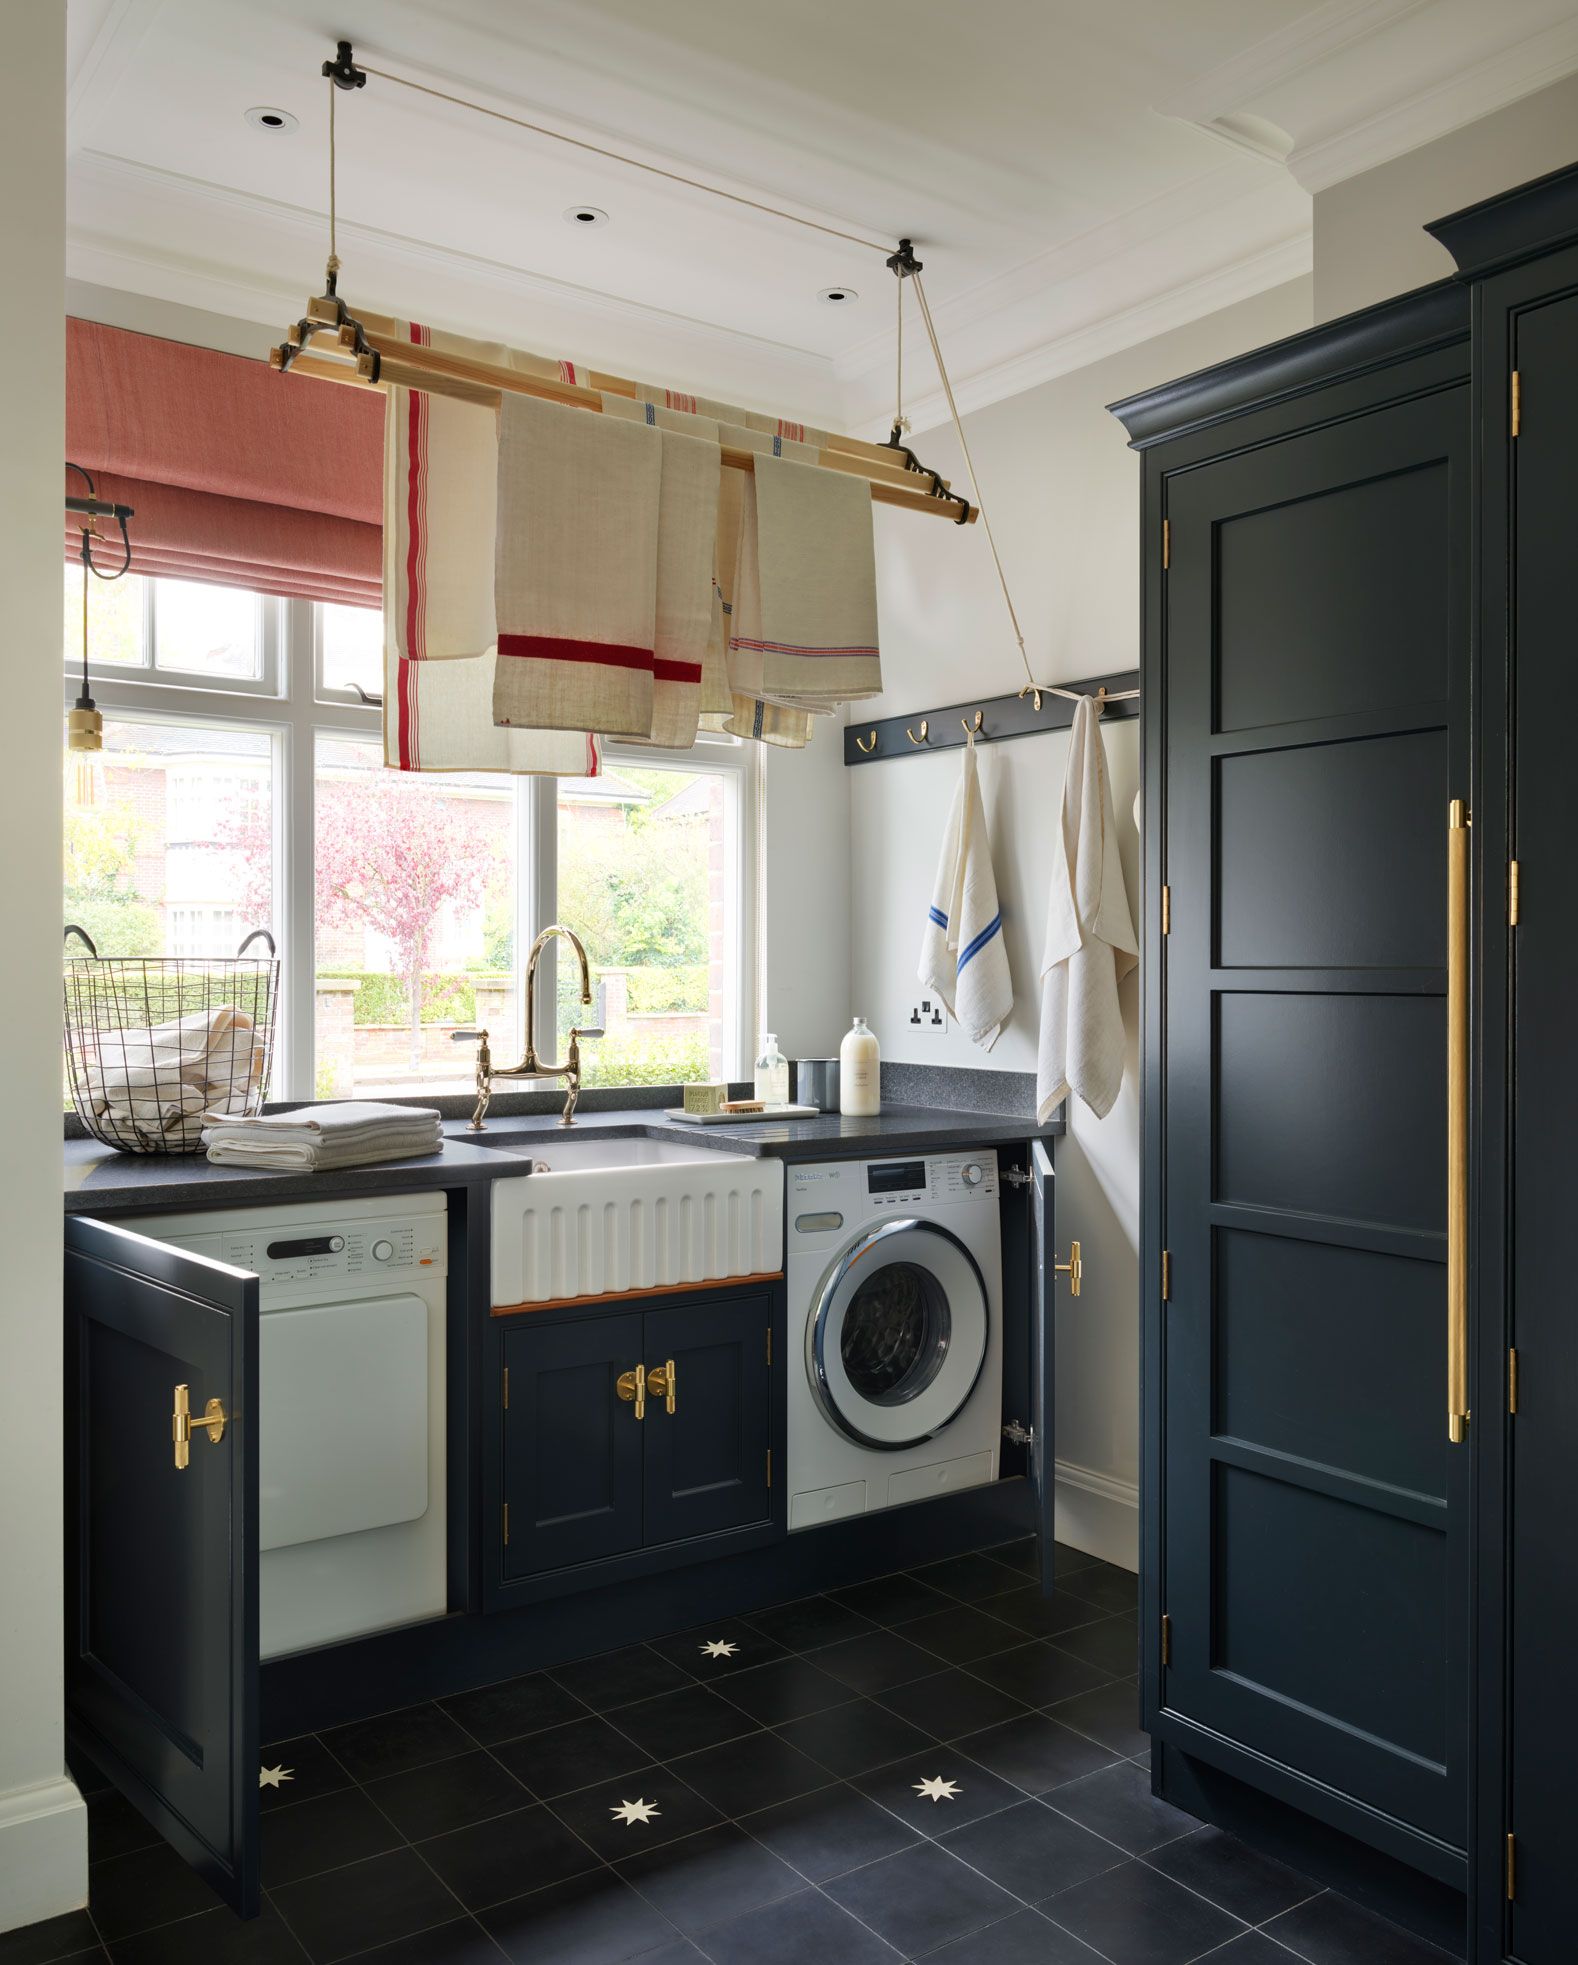 Laundry room ideas – 15 luxurious looks for your laundry room